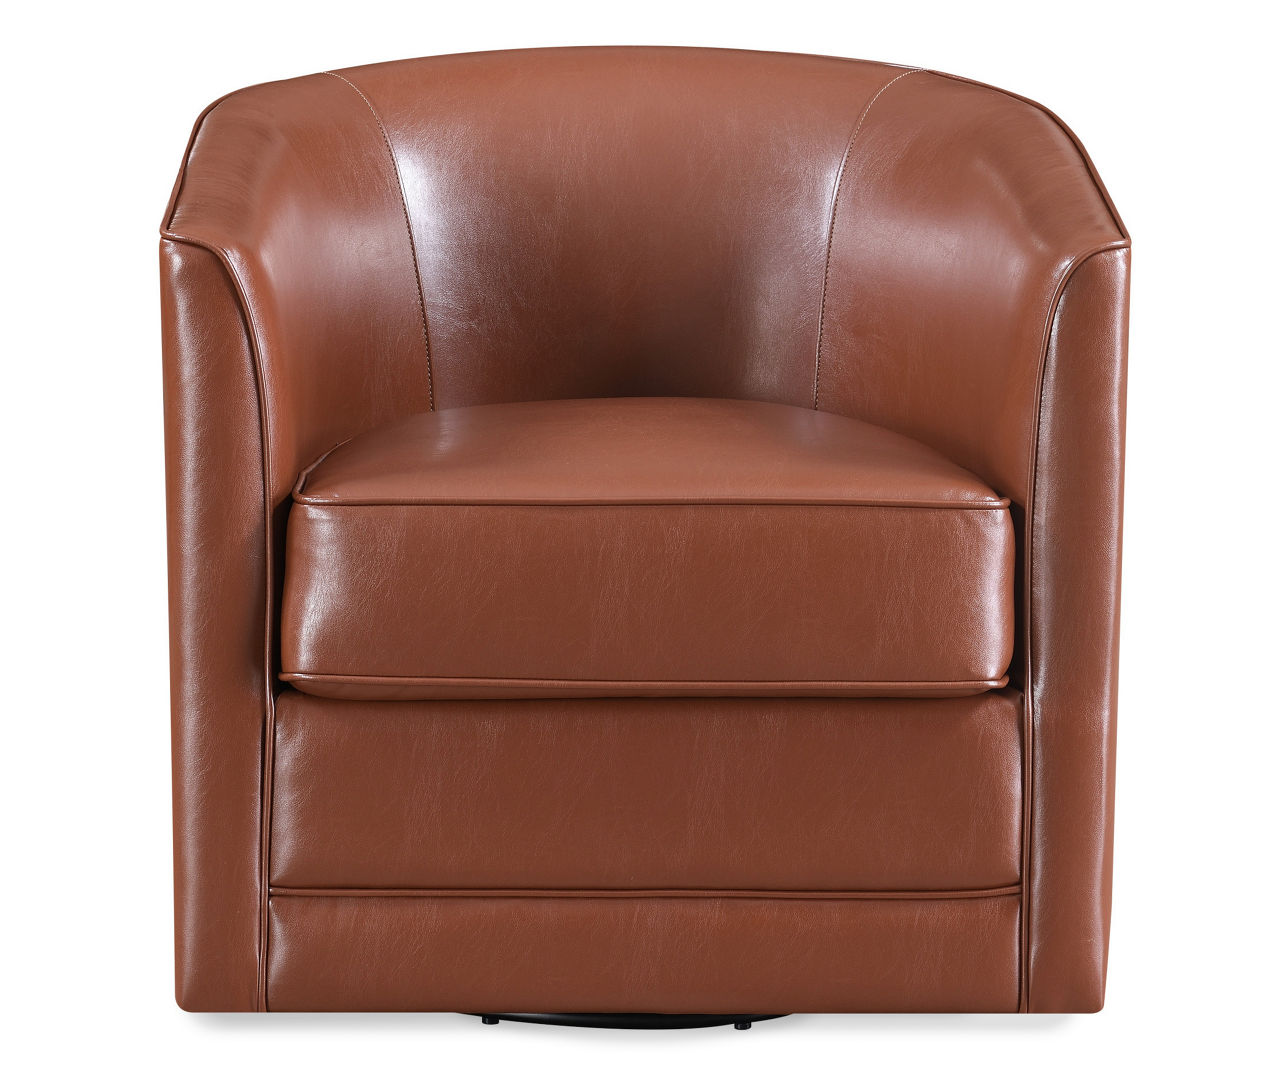 Hammond Chestnut Brown Faux Leather Swivel Accent Chair